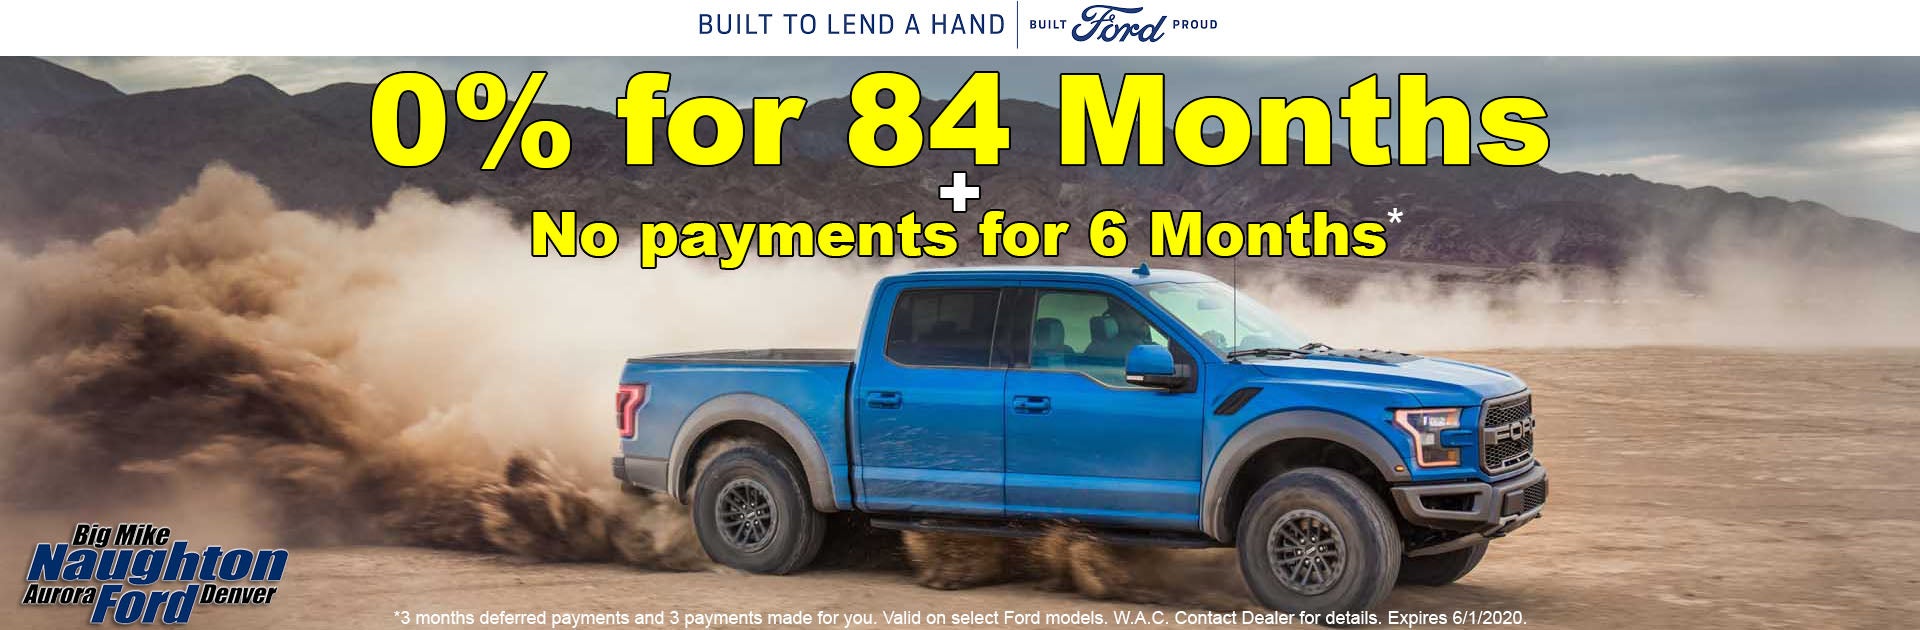 Mike Naughton Ford May 2020 Financing Offer